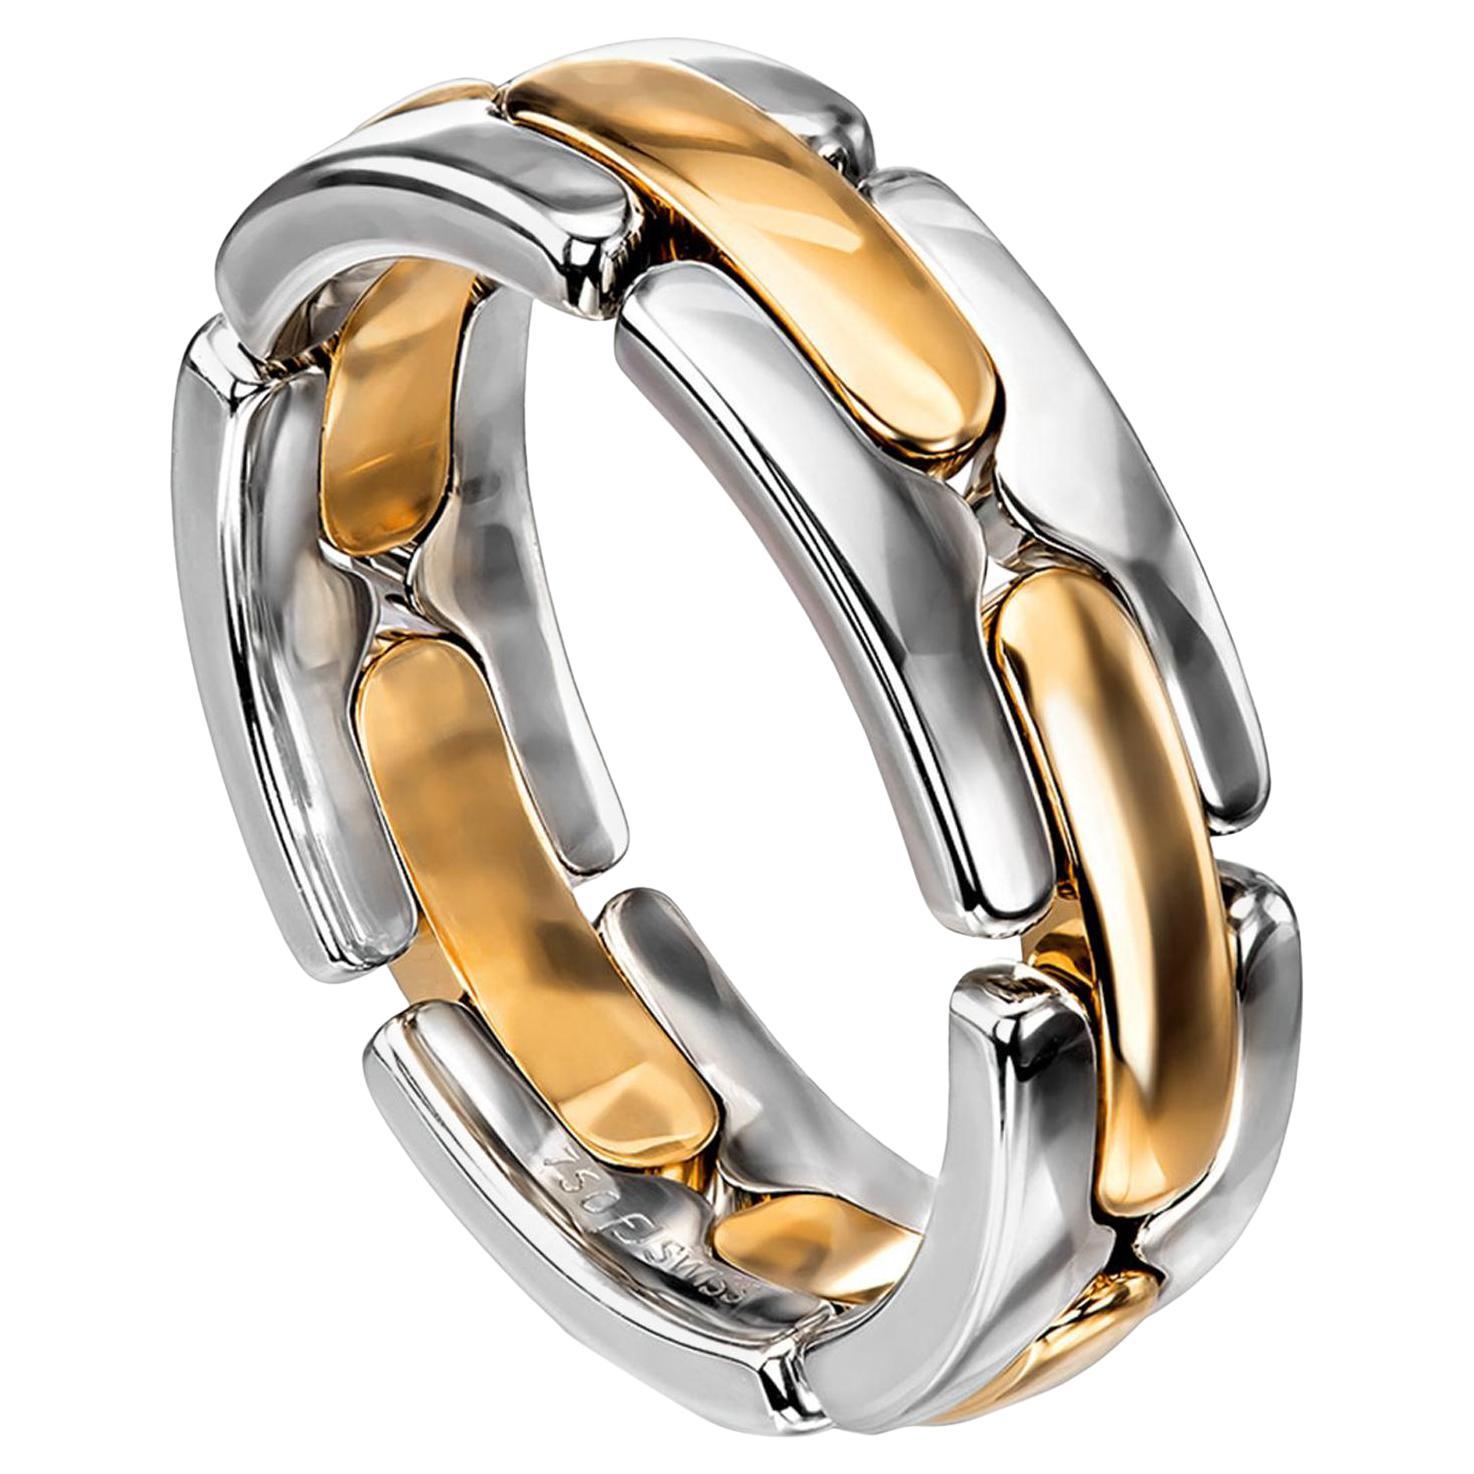 For Sale:  Furrer Jacot 18 Karat White and Yellow Gold Two-Tone Collapsible Link Ring